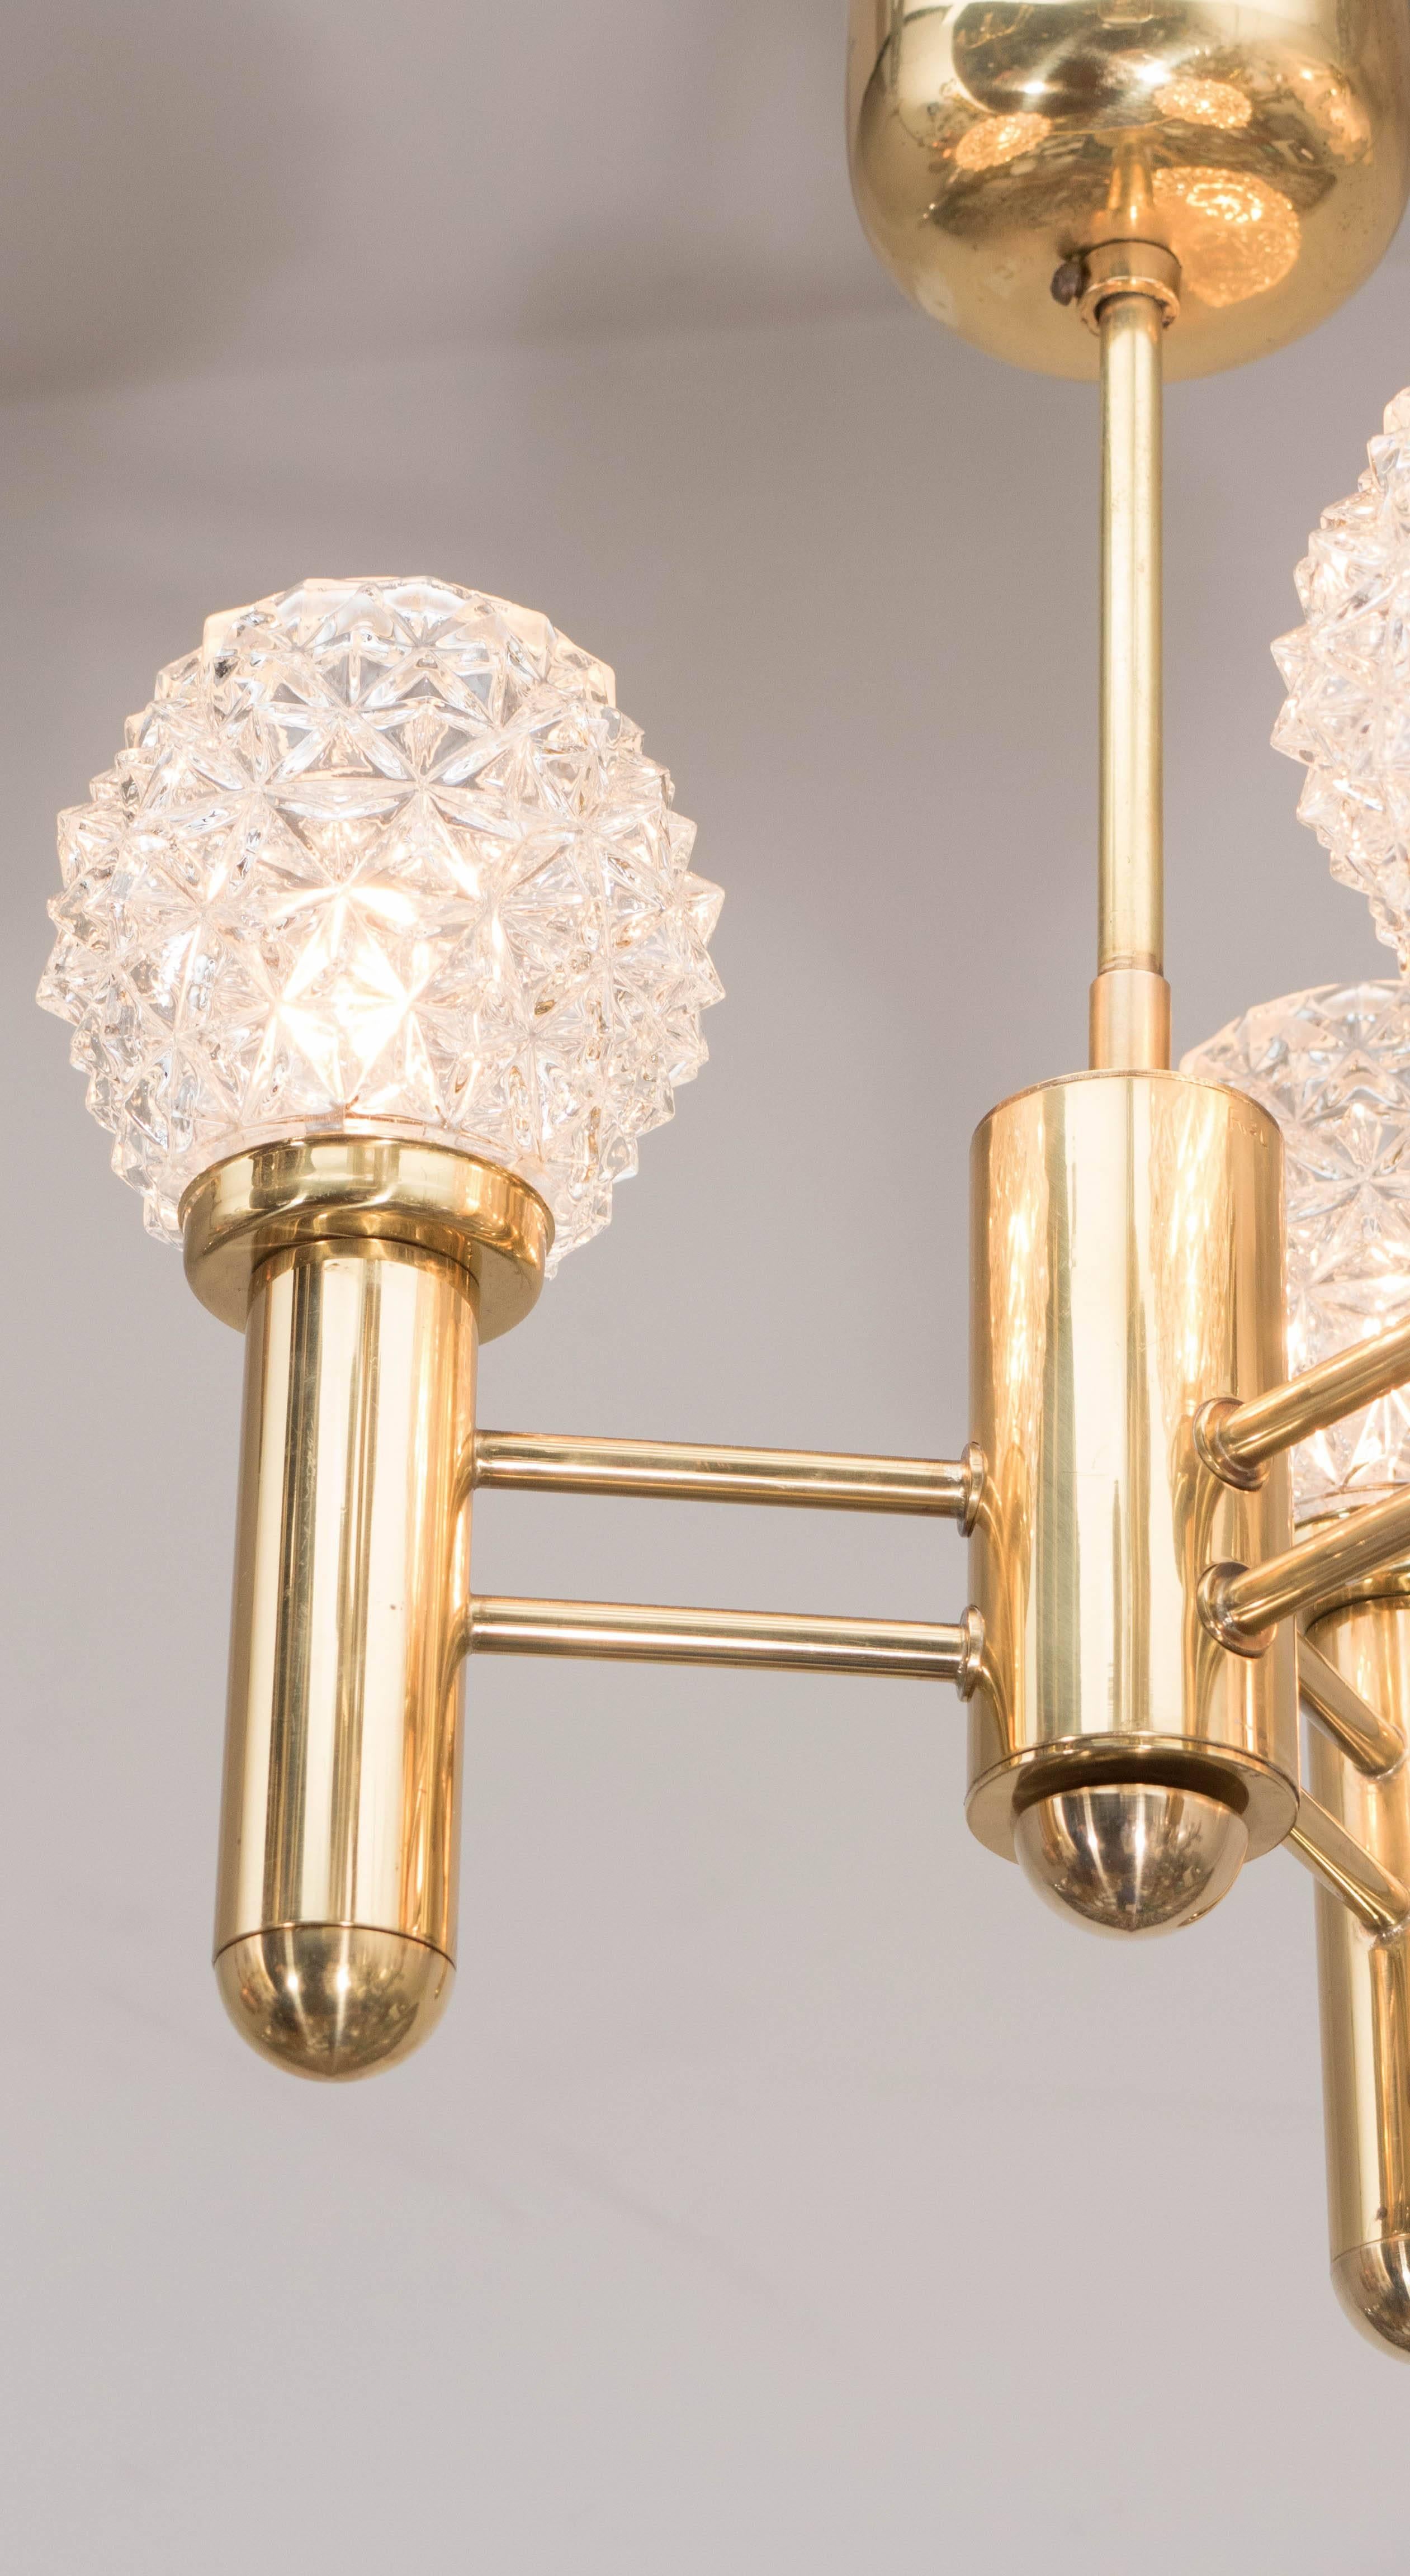 German Mid-Century Modern Three-Arm Brass Chandelier with Faceted Glass Globes For Sale